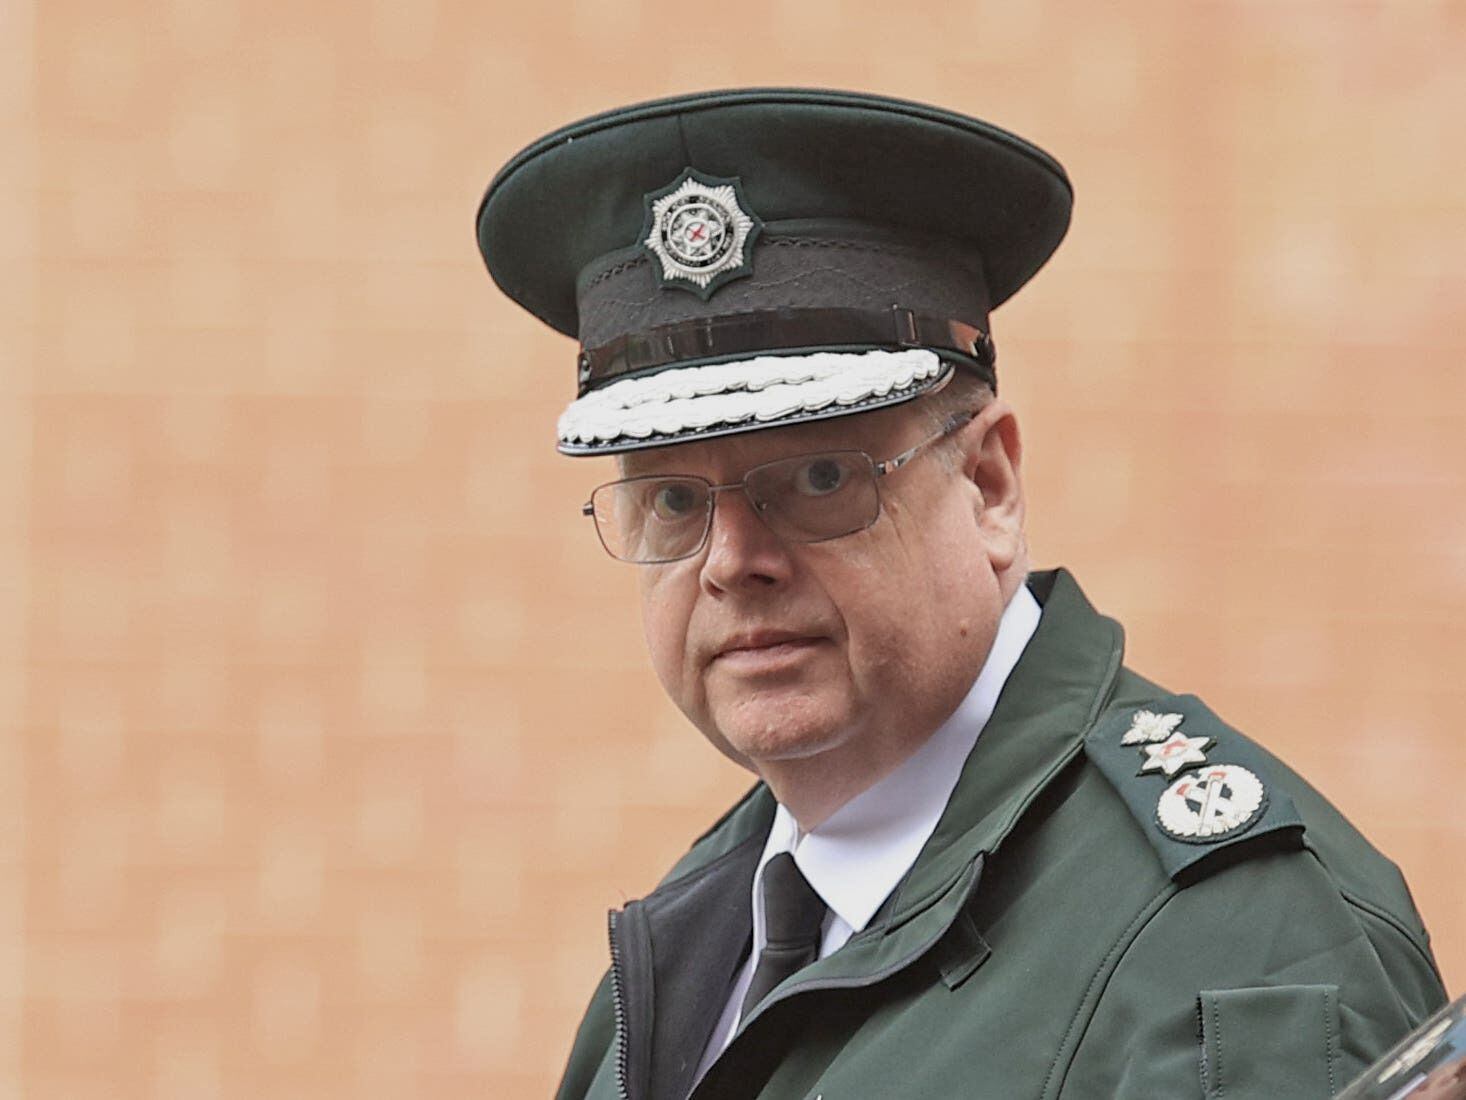 PSNI chief constable has no option but to resign after court ruling, insists DUP